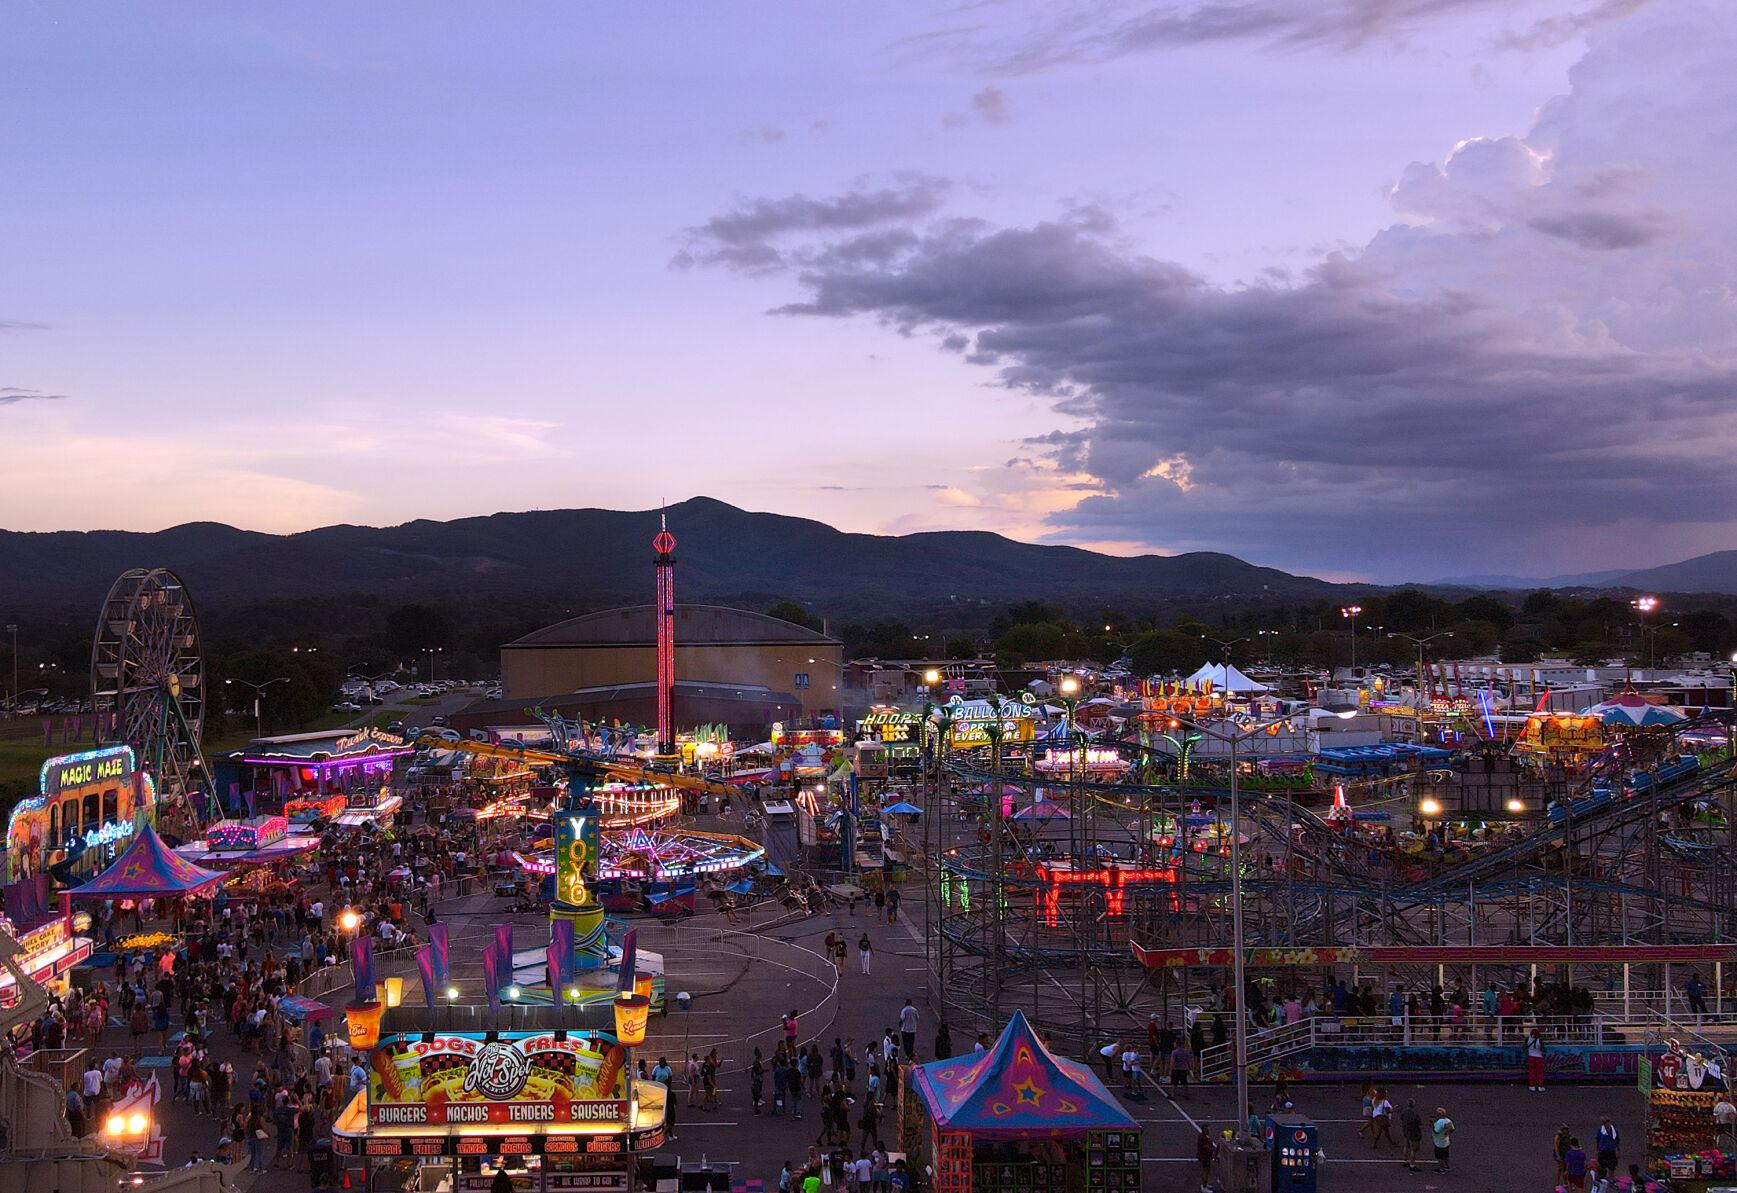 Photos and video Scenes from the 2021 Salem Fair Gallery